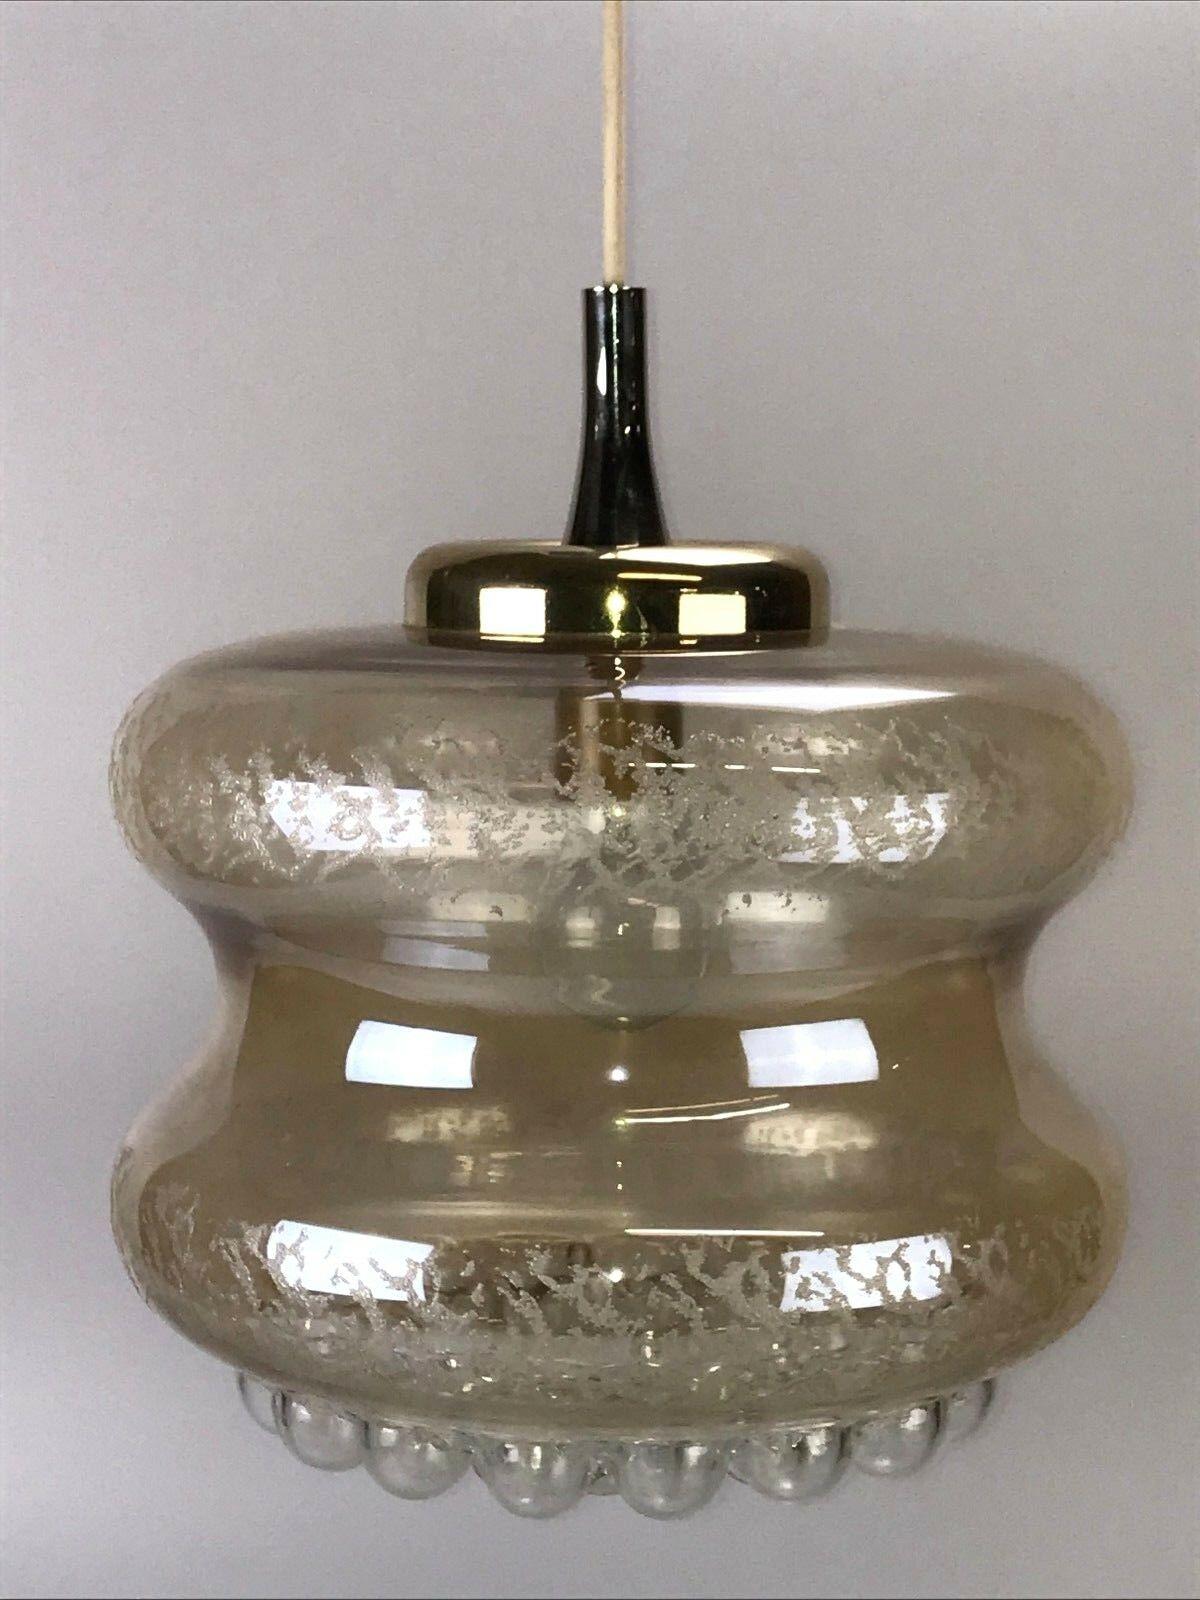 70s Lamp hanging lamp ball lamp bubble brass glass space age design.

Object: ceiling lamp

Manufacturer:

Condition: good

Age: around 1960-1970

Dimensions:

Diameter = 31cm
Hanging height = 85cm

Other notes:

The pictures serve